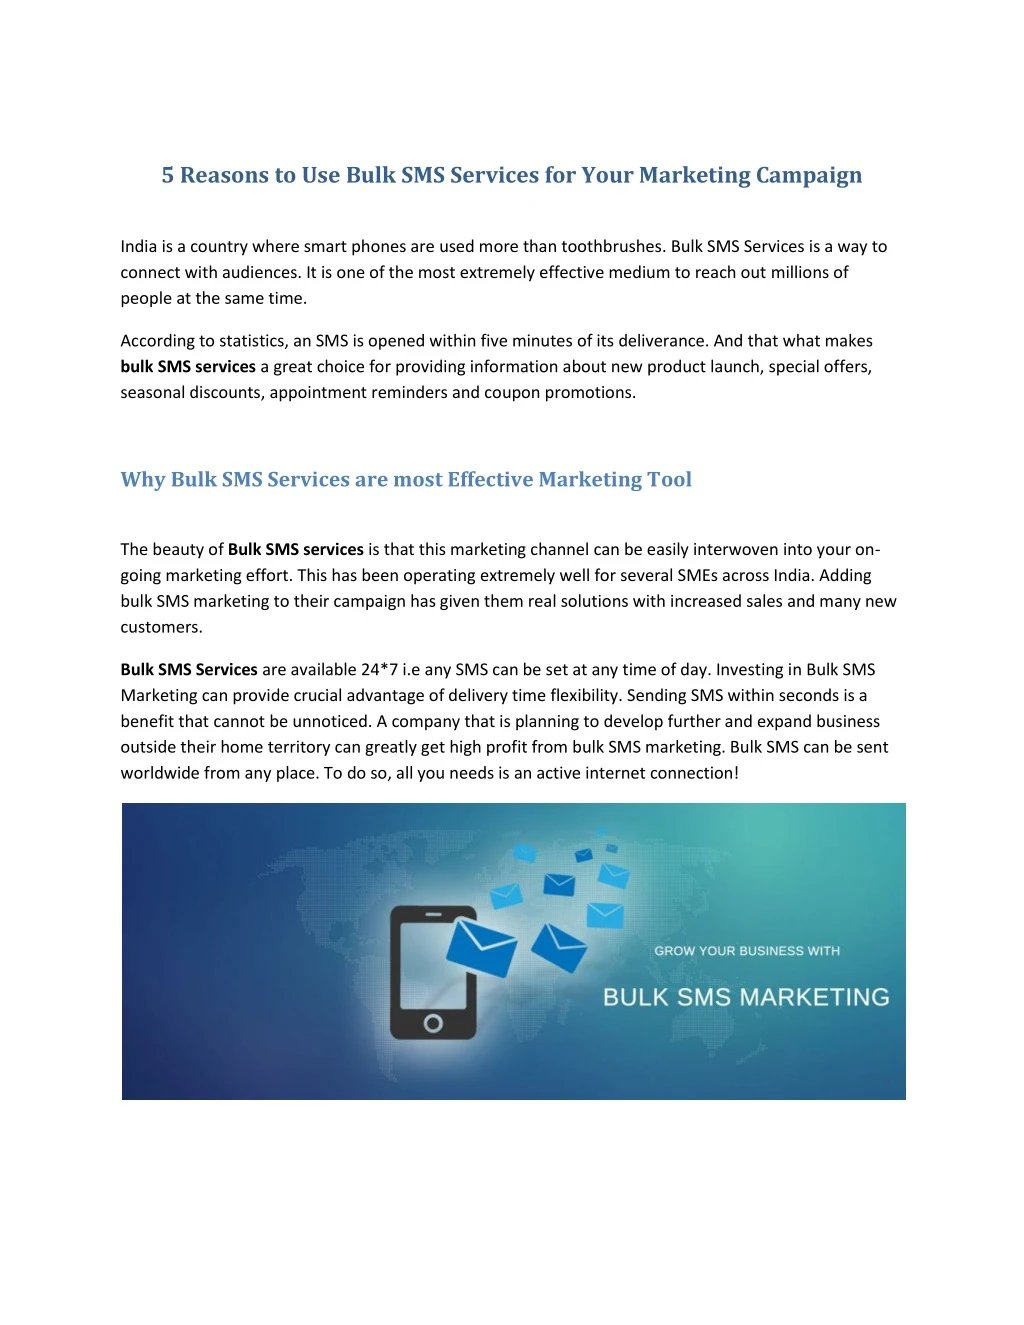 5 reasons to use bulk sms services for your